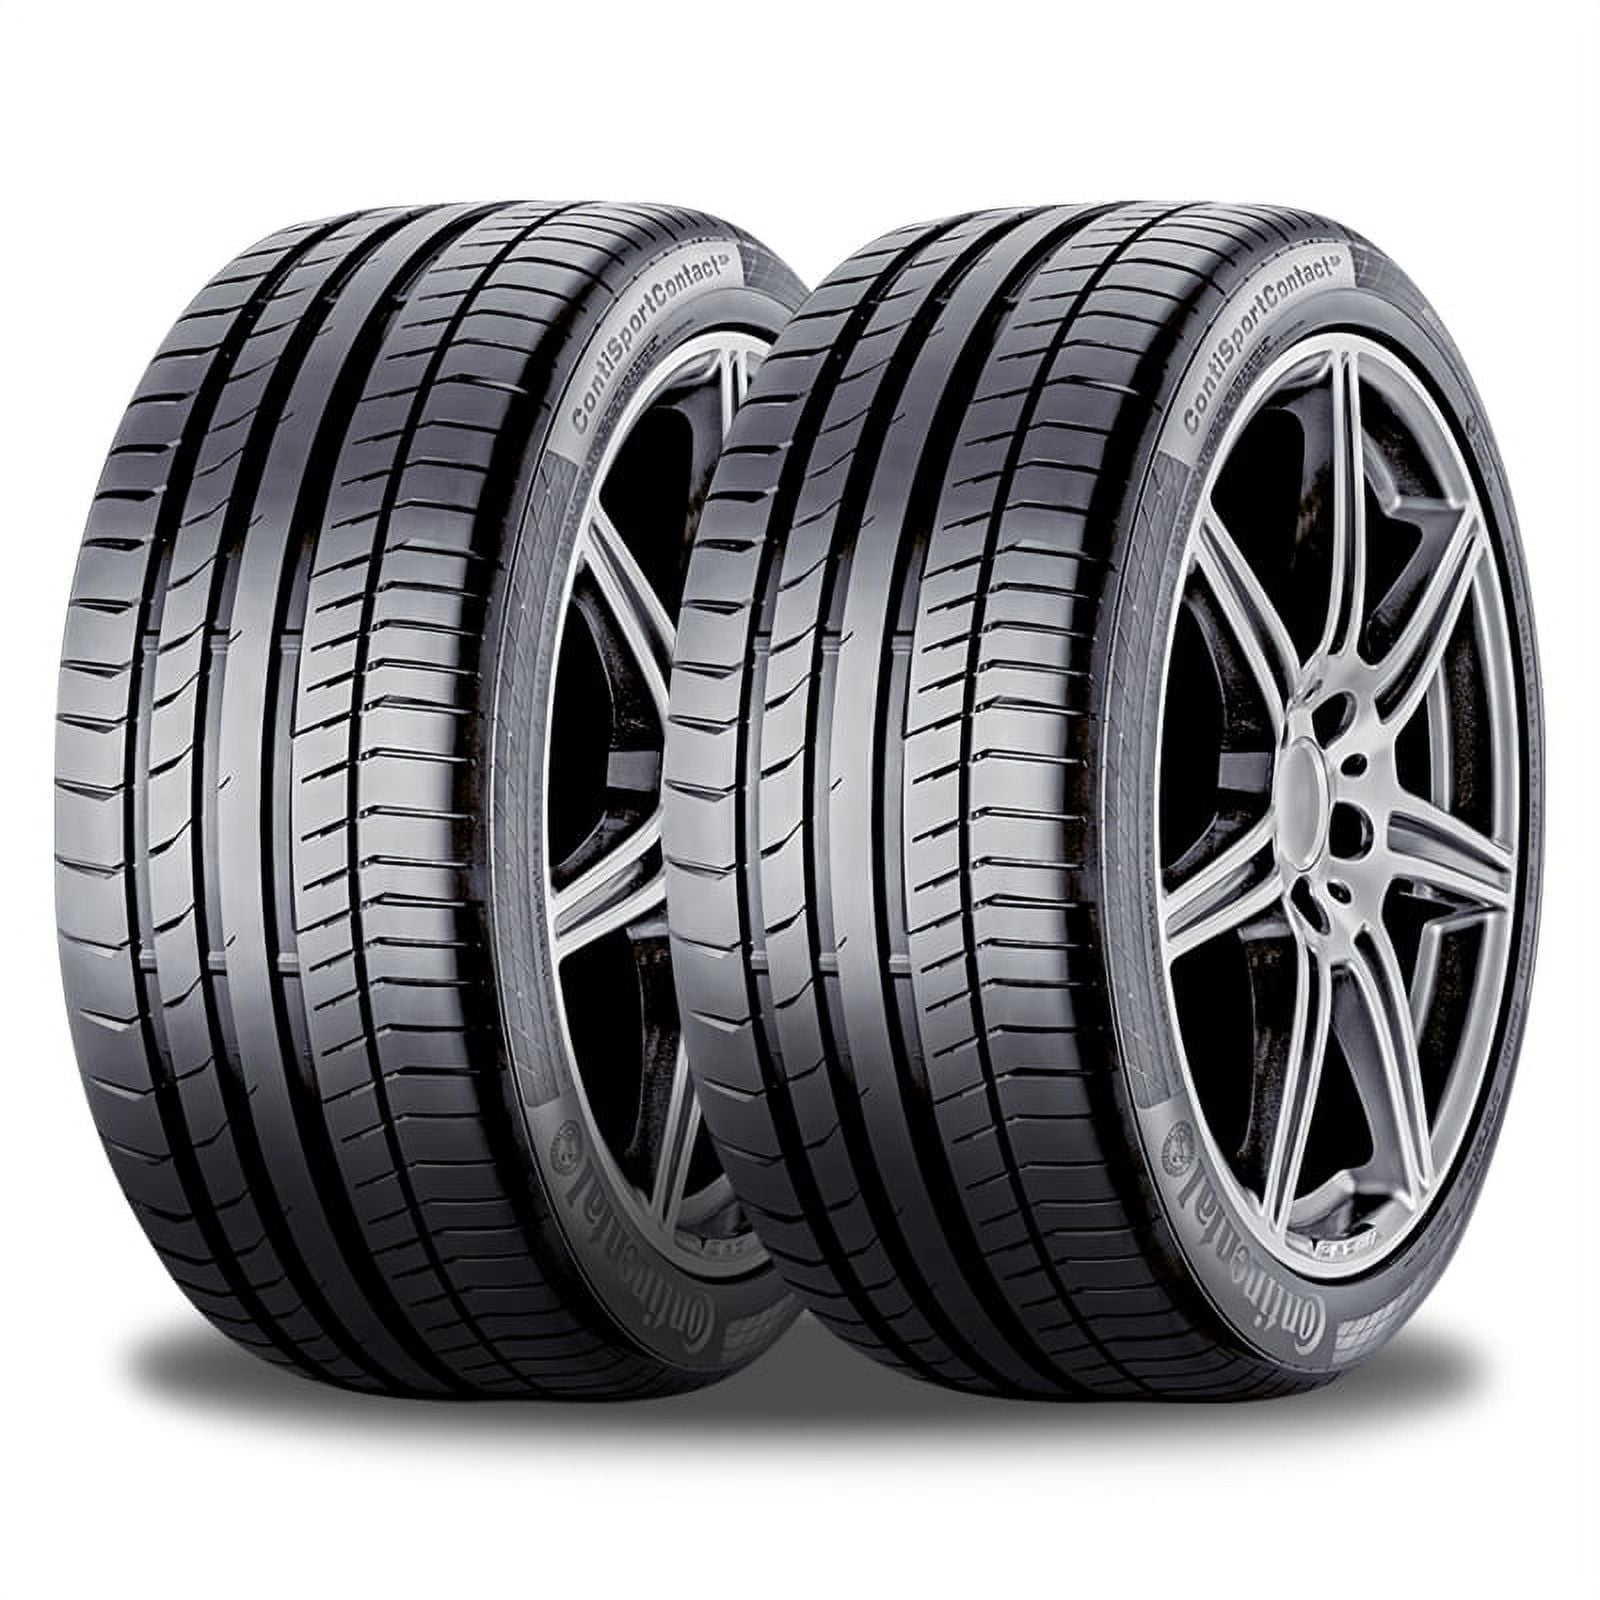 ContiSportContact 101Y 5P Tire Summer 265/40R21 Passenger Continental